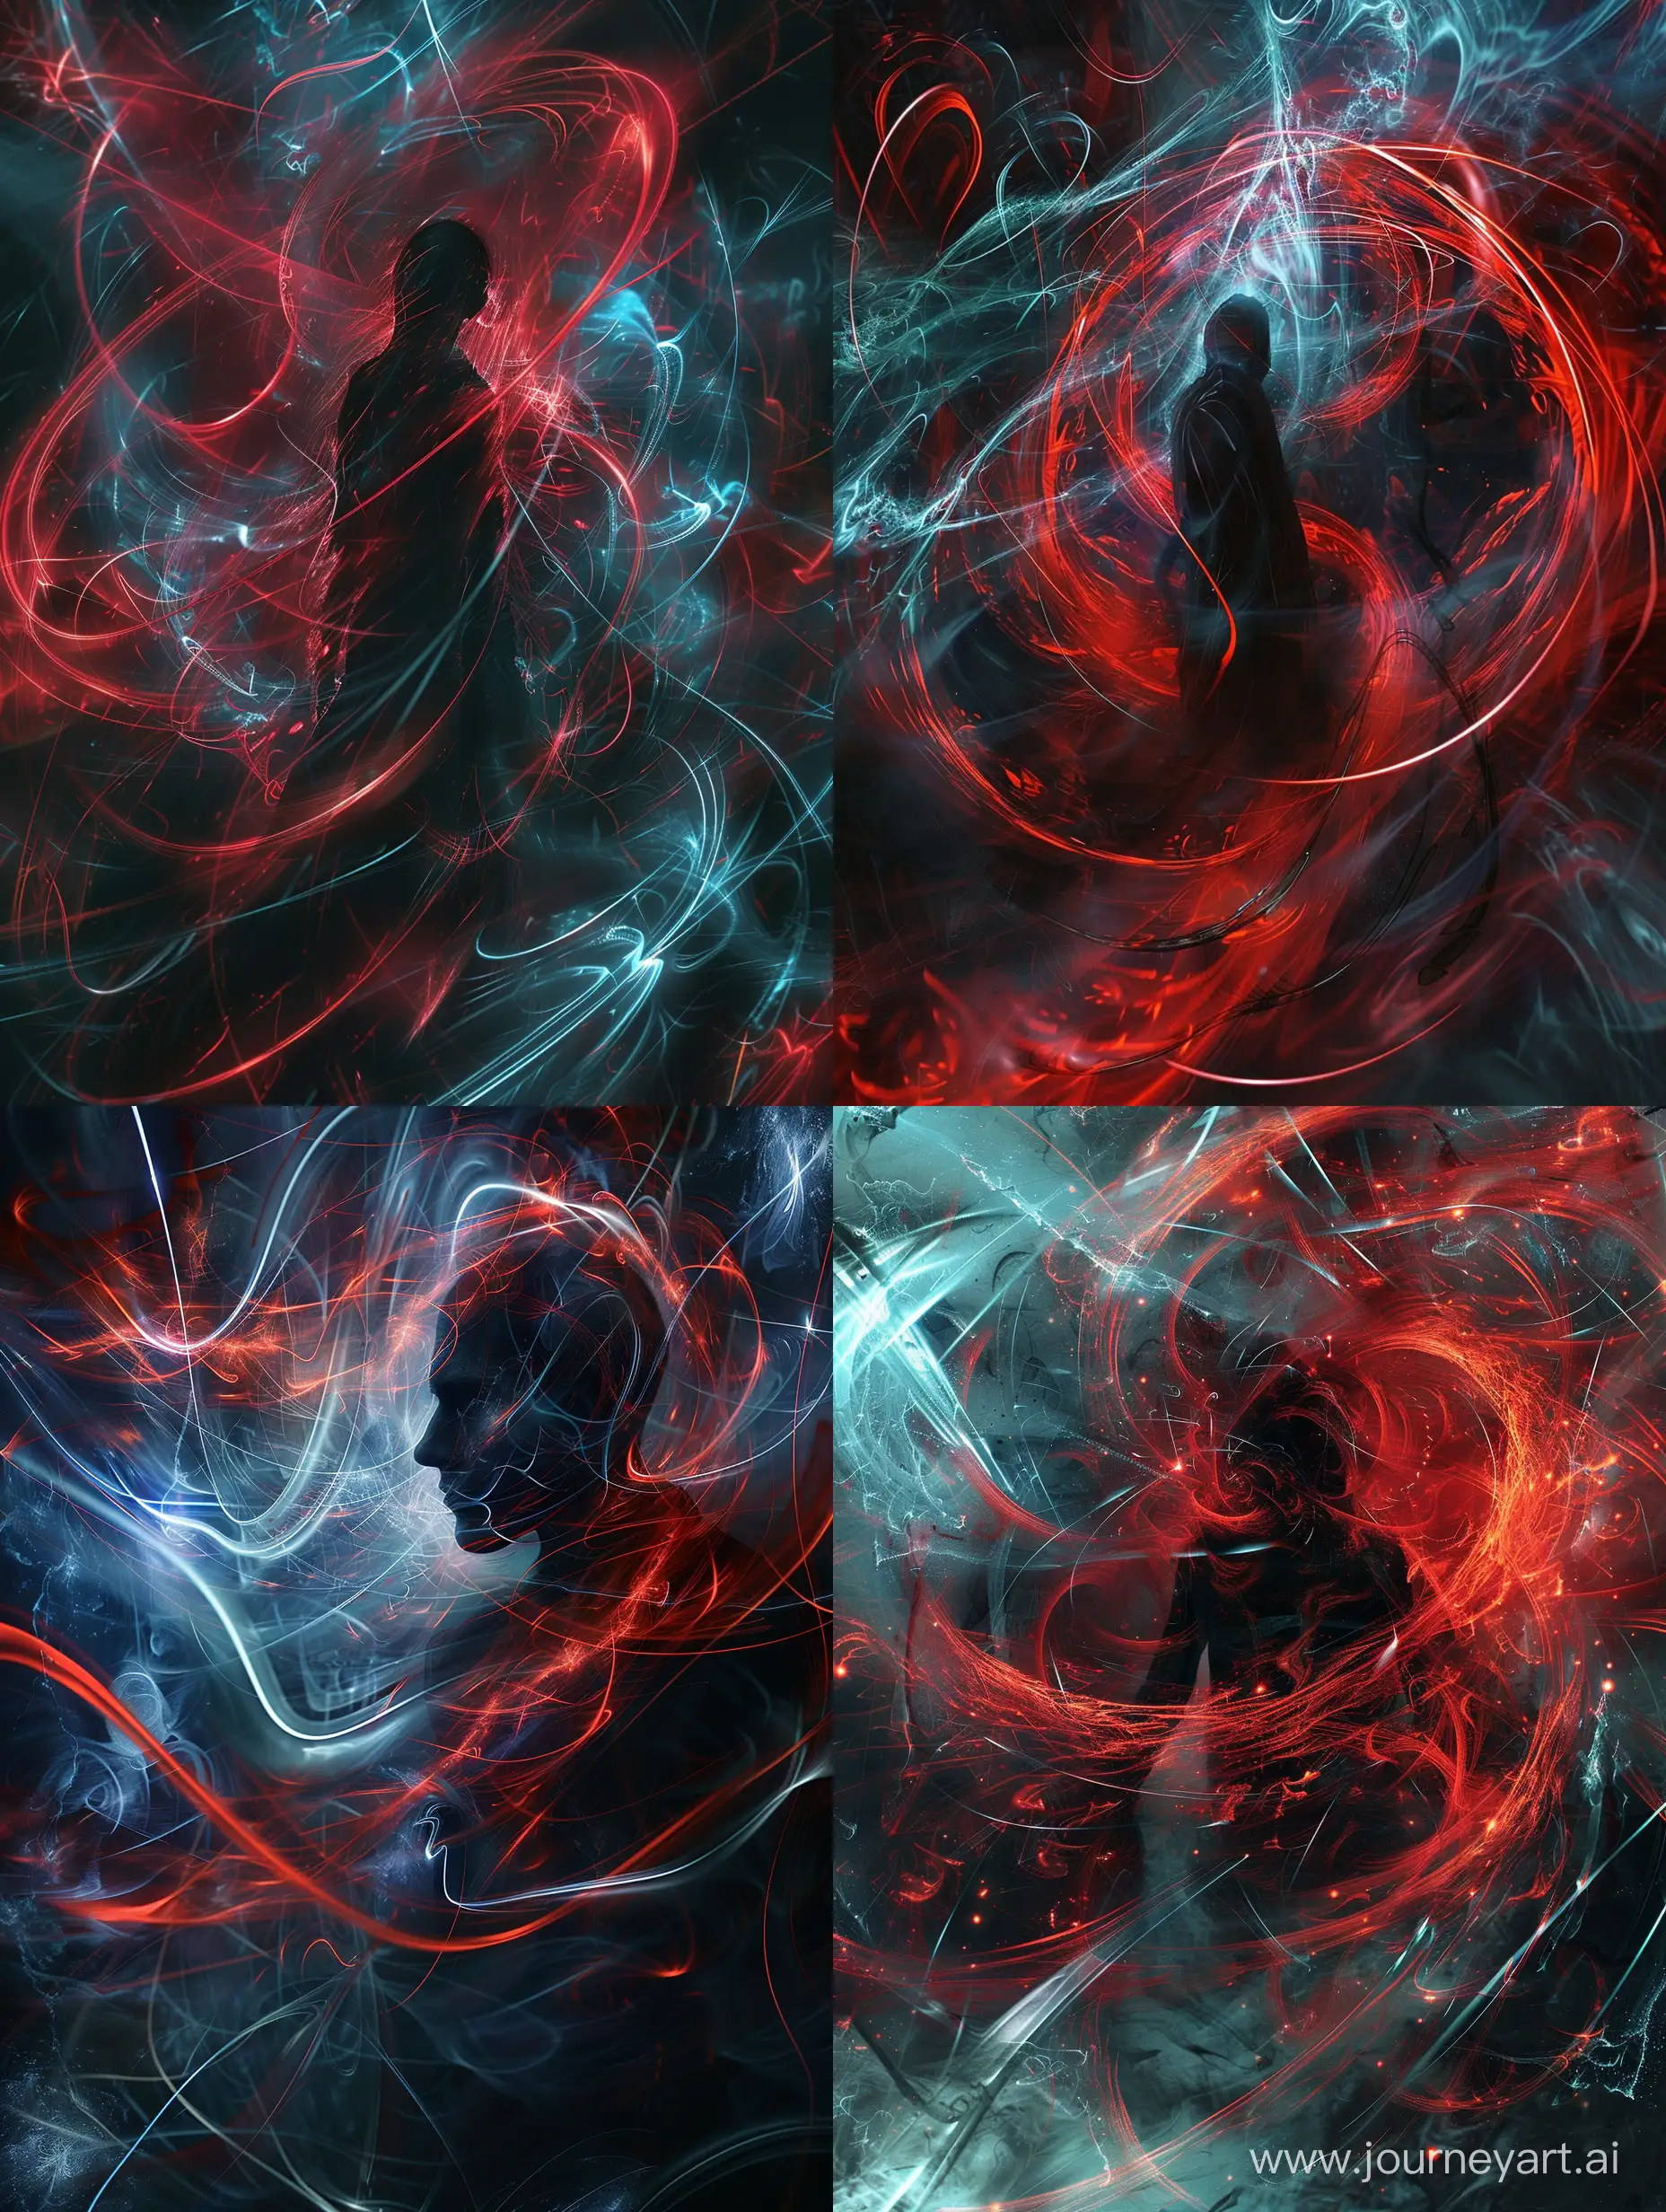 A chillingly mystical quantum encryption is depicted in a captivating composite environmental photograph. At its core is a figure, obscured by the ethereal glow of swirling red and black energy, intertwined with delicate threads of luminescent blue light. The image is a masterfully crafted digital artwork, rendered with exquisite attention to detail. The enigmatic subject exudes an otherworldly aura, evoking both awe and unease.